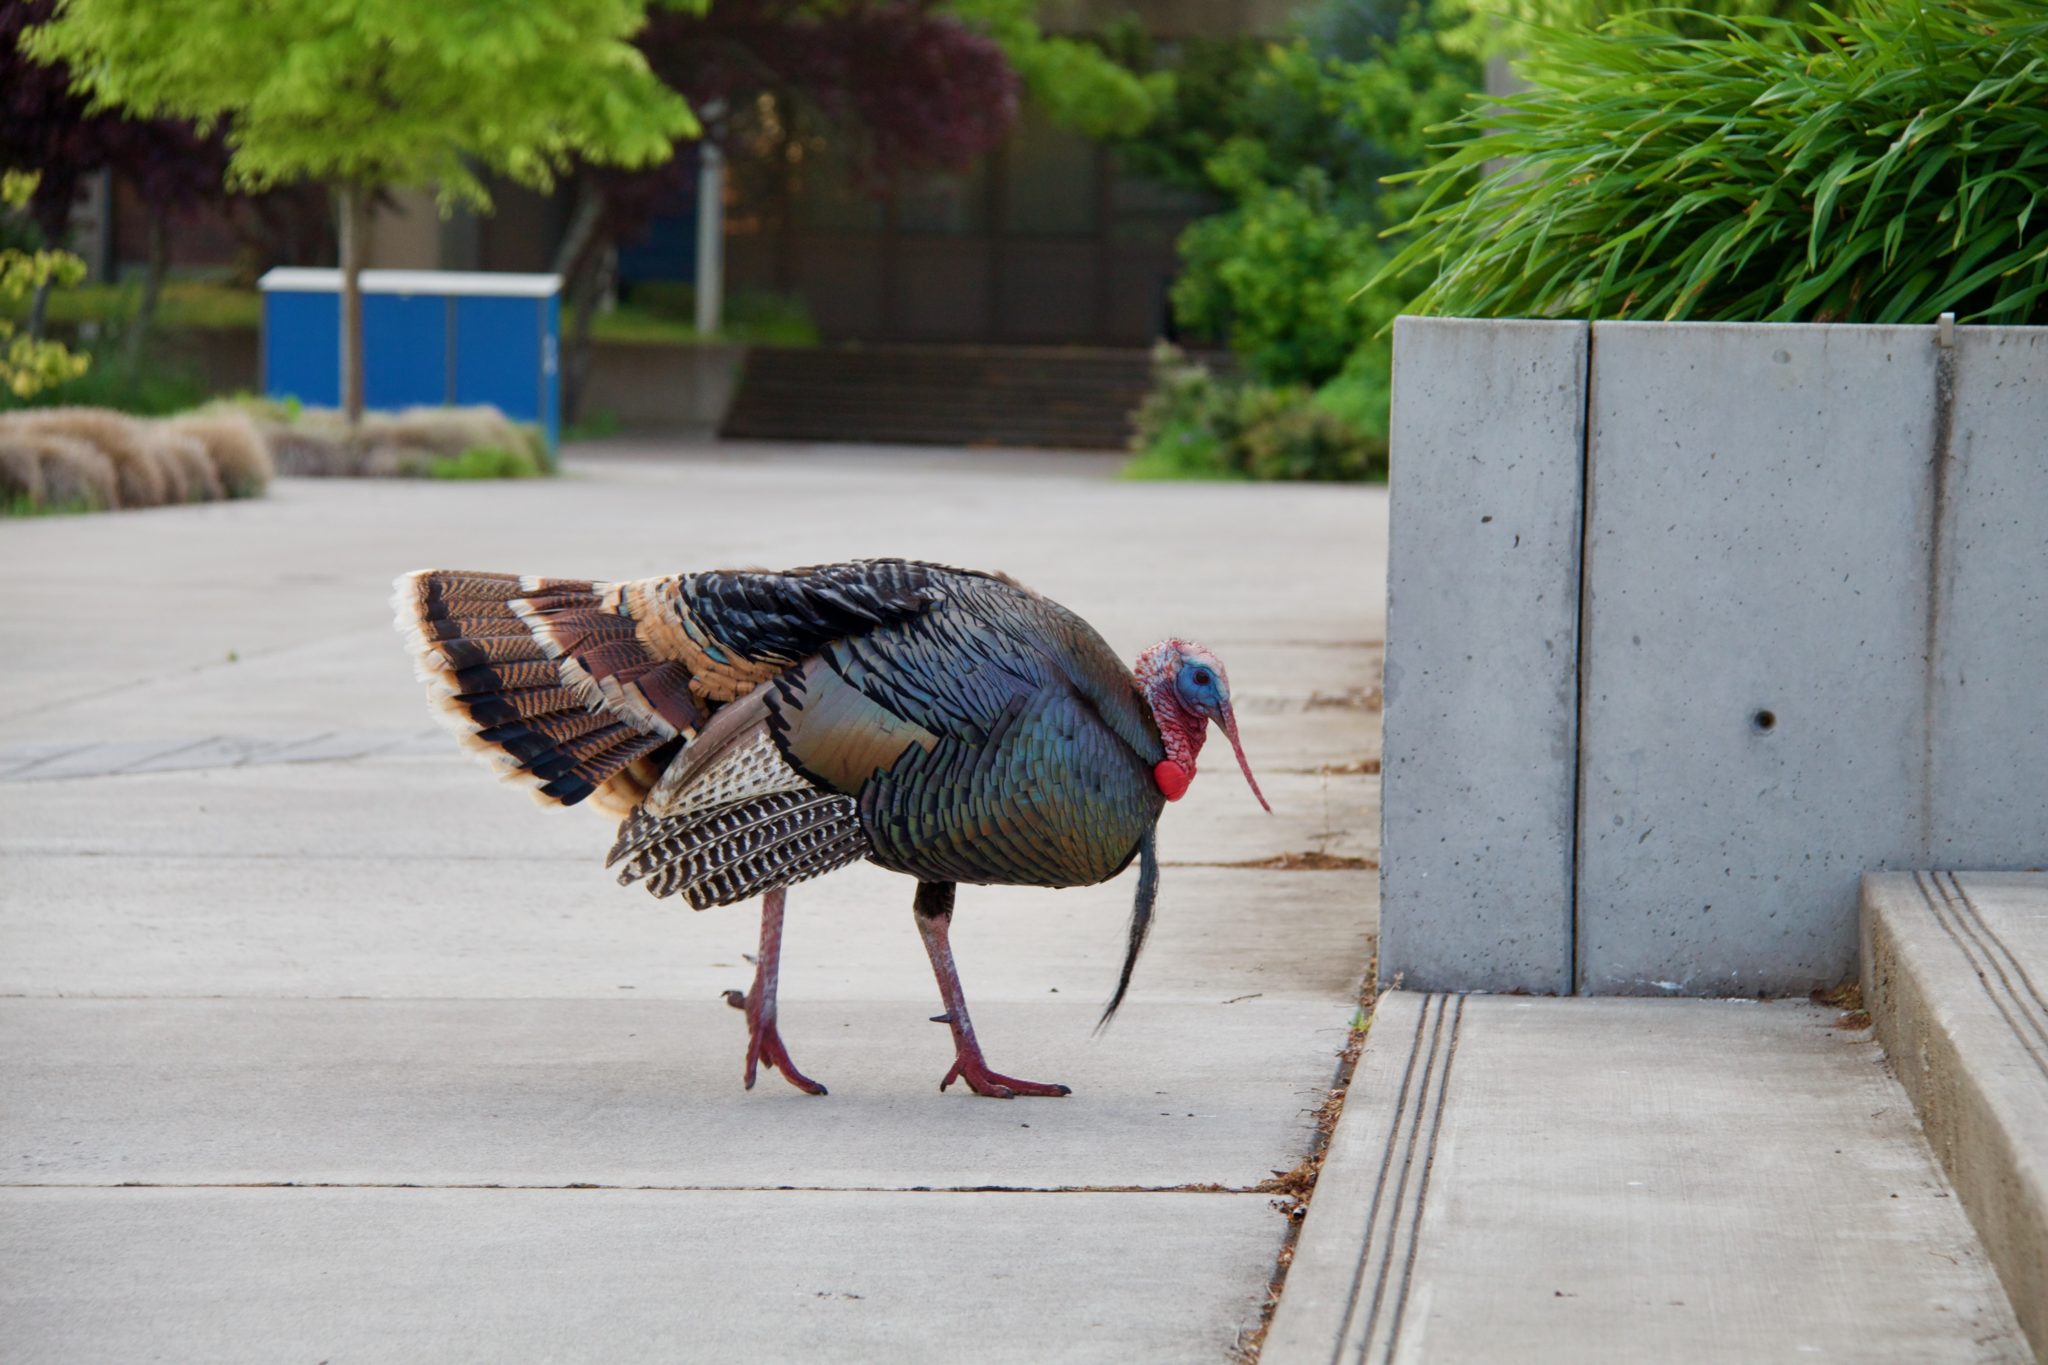 One of the campus turkeys in front of the center building